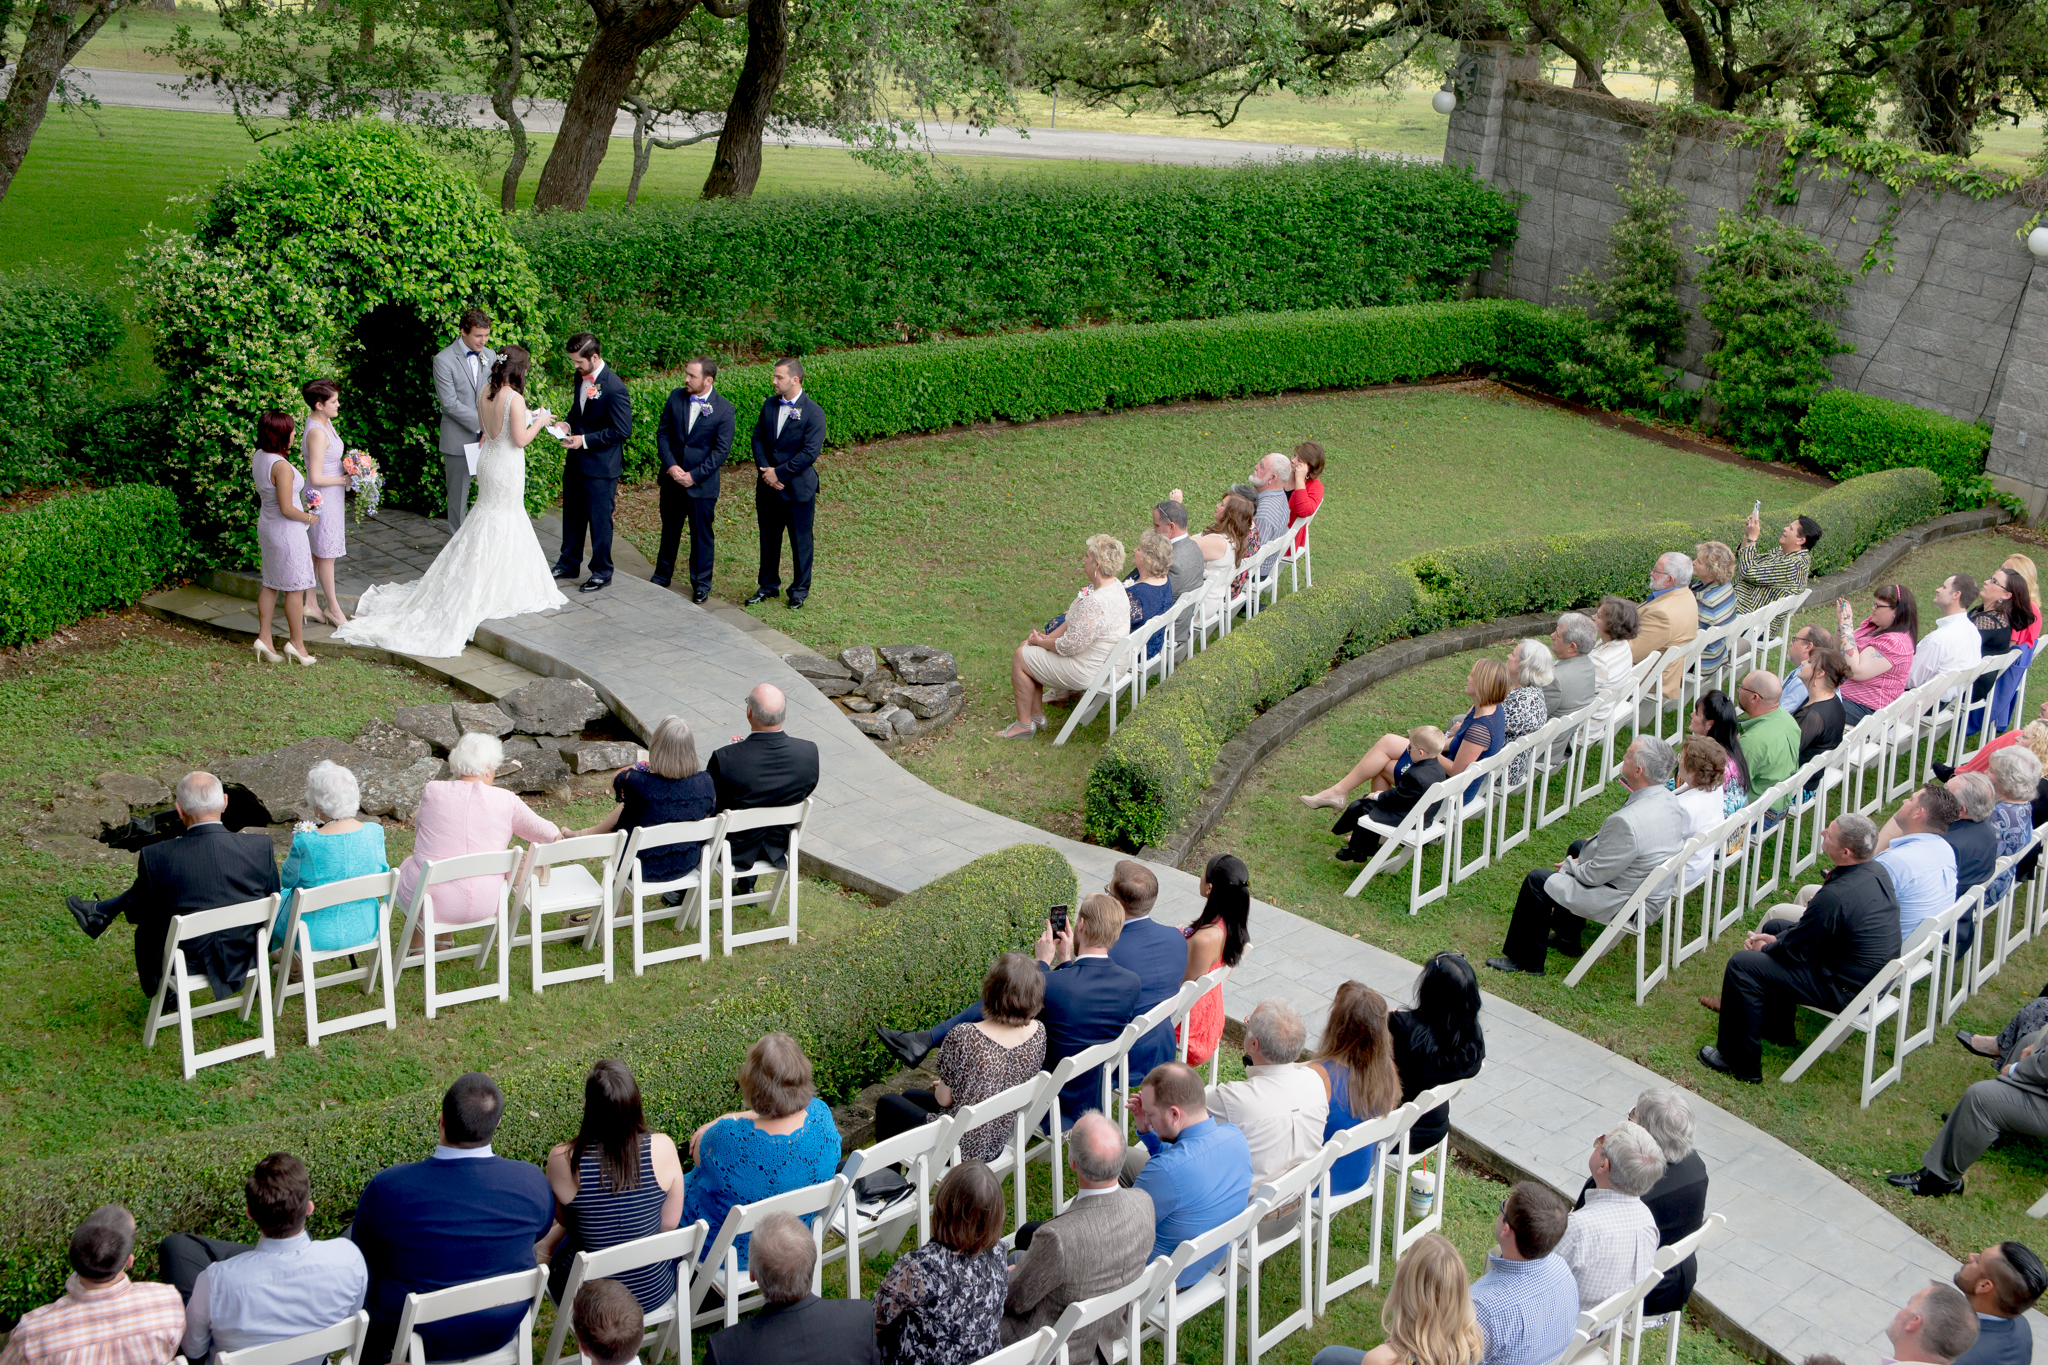 Tara and Taylor married at Castle Avalon. Beautiful wedding in the hill country.